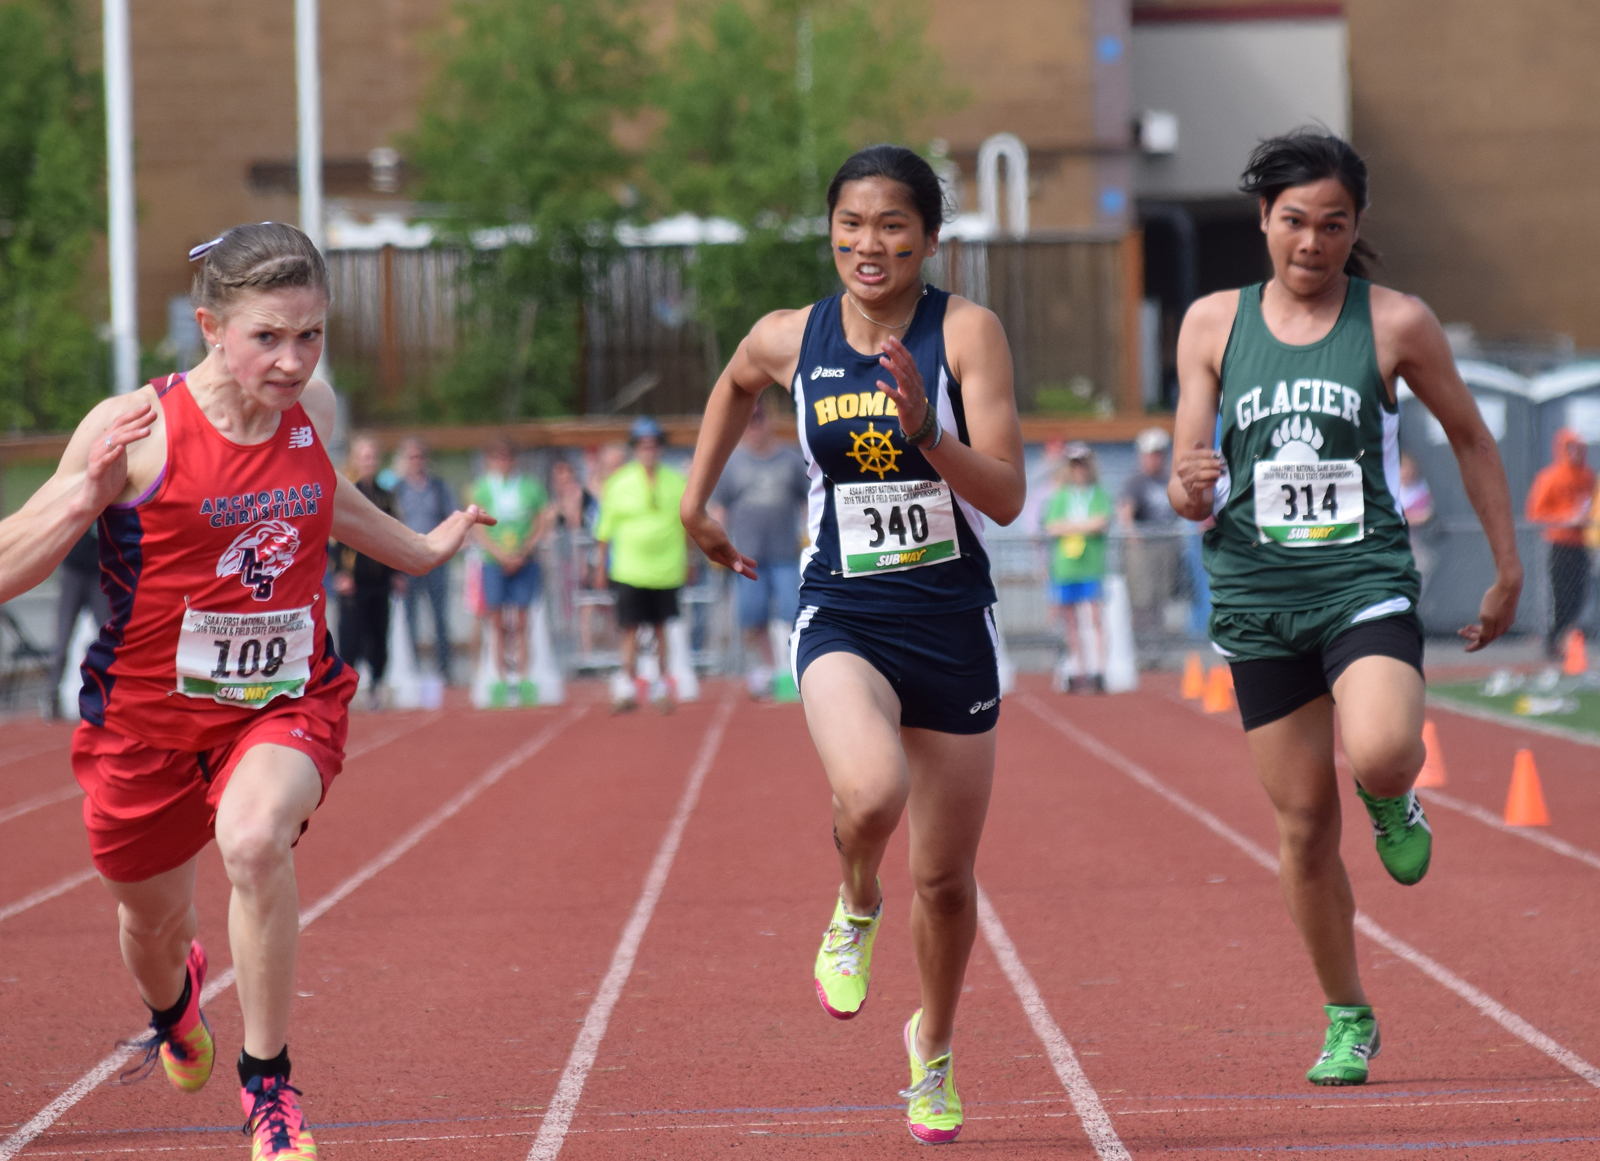 Homer freshman Kaylee Veldstra (340) races her way to a runner-up finish in the 1-2-3A girls 100-meter sprint at the state track and field championships Saturday at Dimond Alumni Field in Anchorage.-Photo by Joey Klecka, Peninsula Clarion